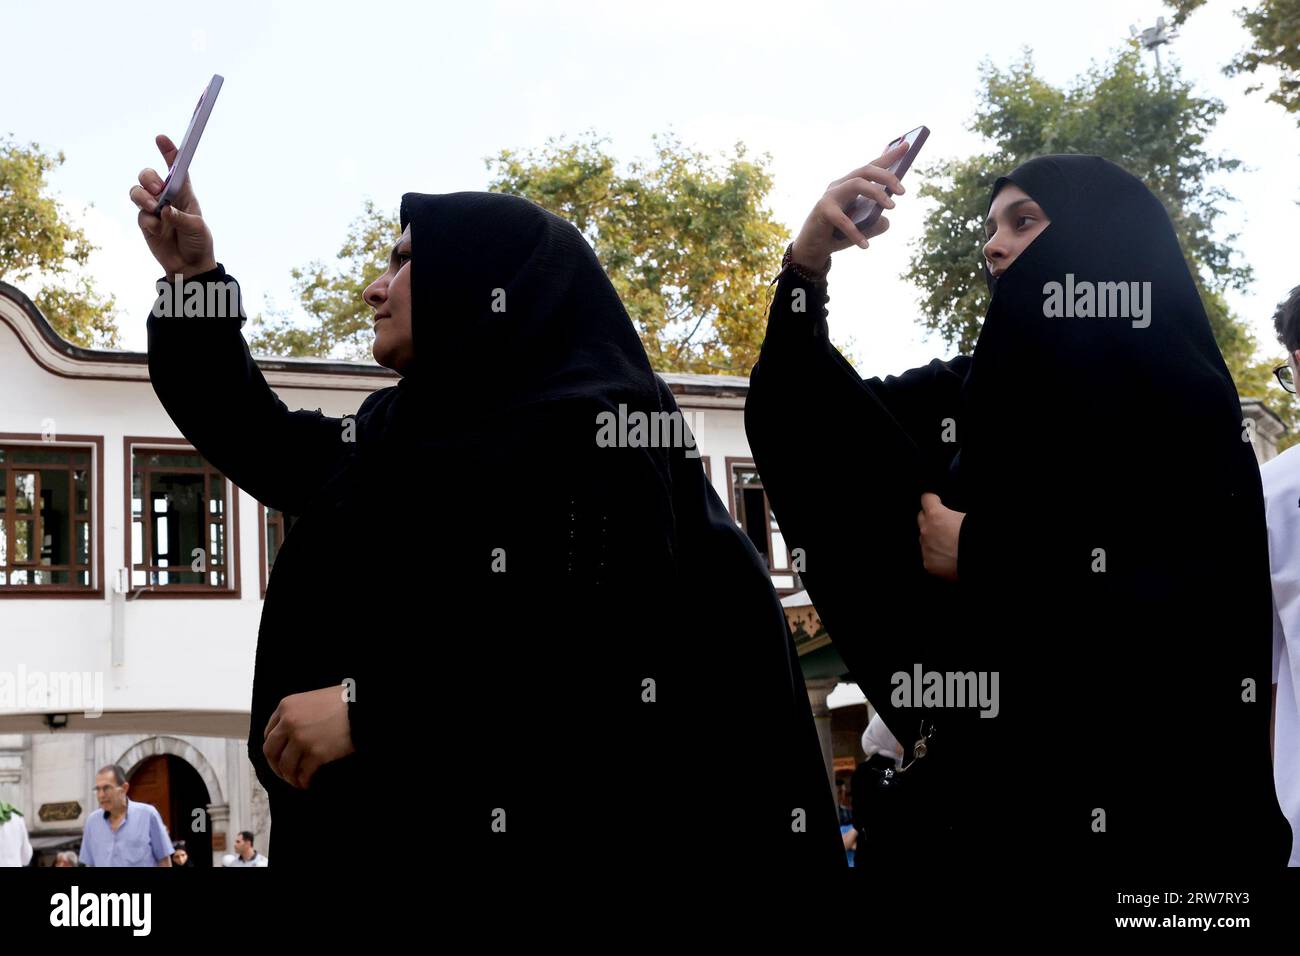 Muslim women, each wearing a burqa, taking selfies with their smartphones at the Eyüp Sultan Mosque in Istanbul Turkey Stock Photo